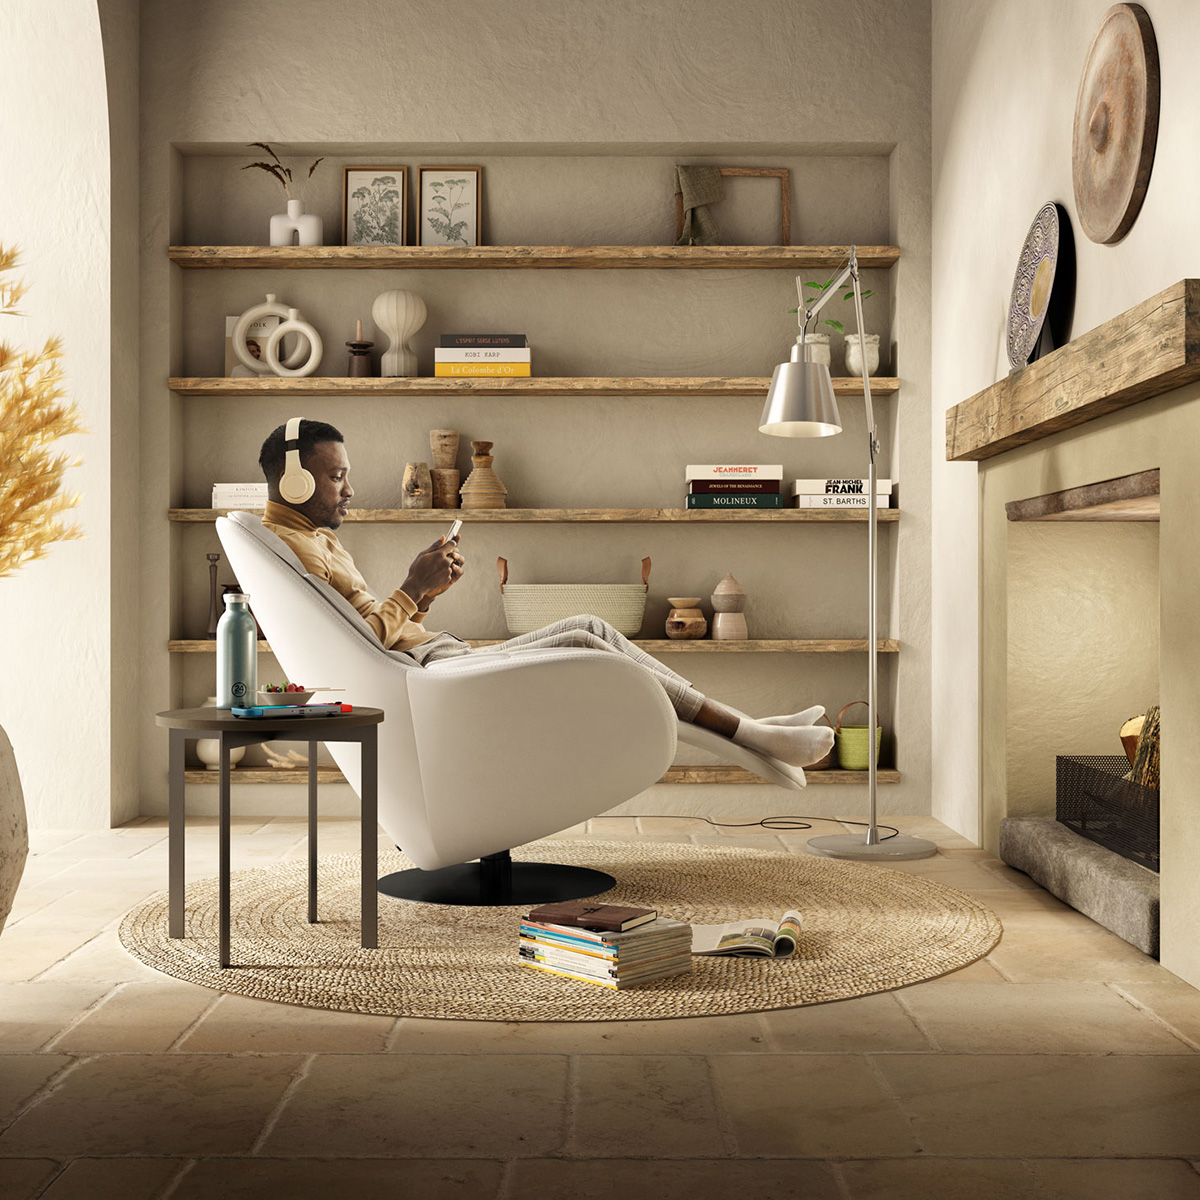 Natuzzi editorial - Your favorite position wherever you want